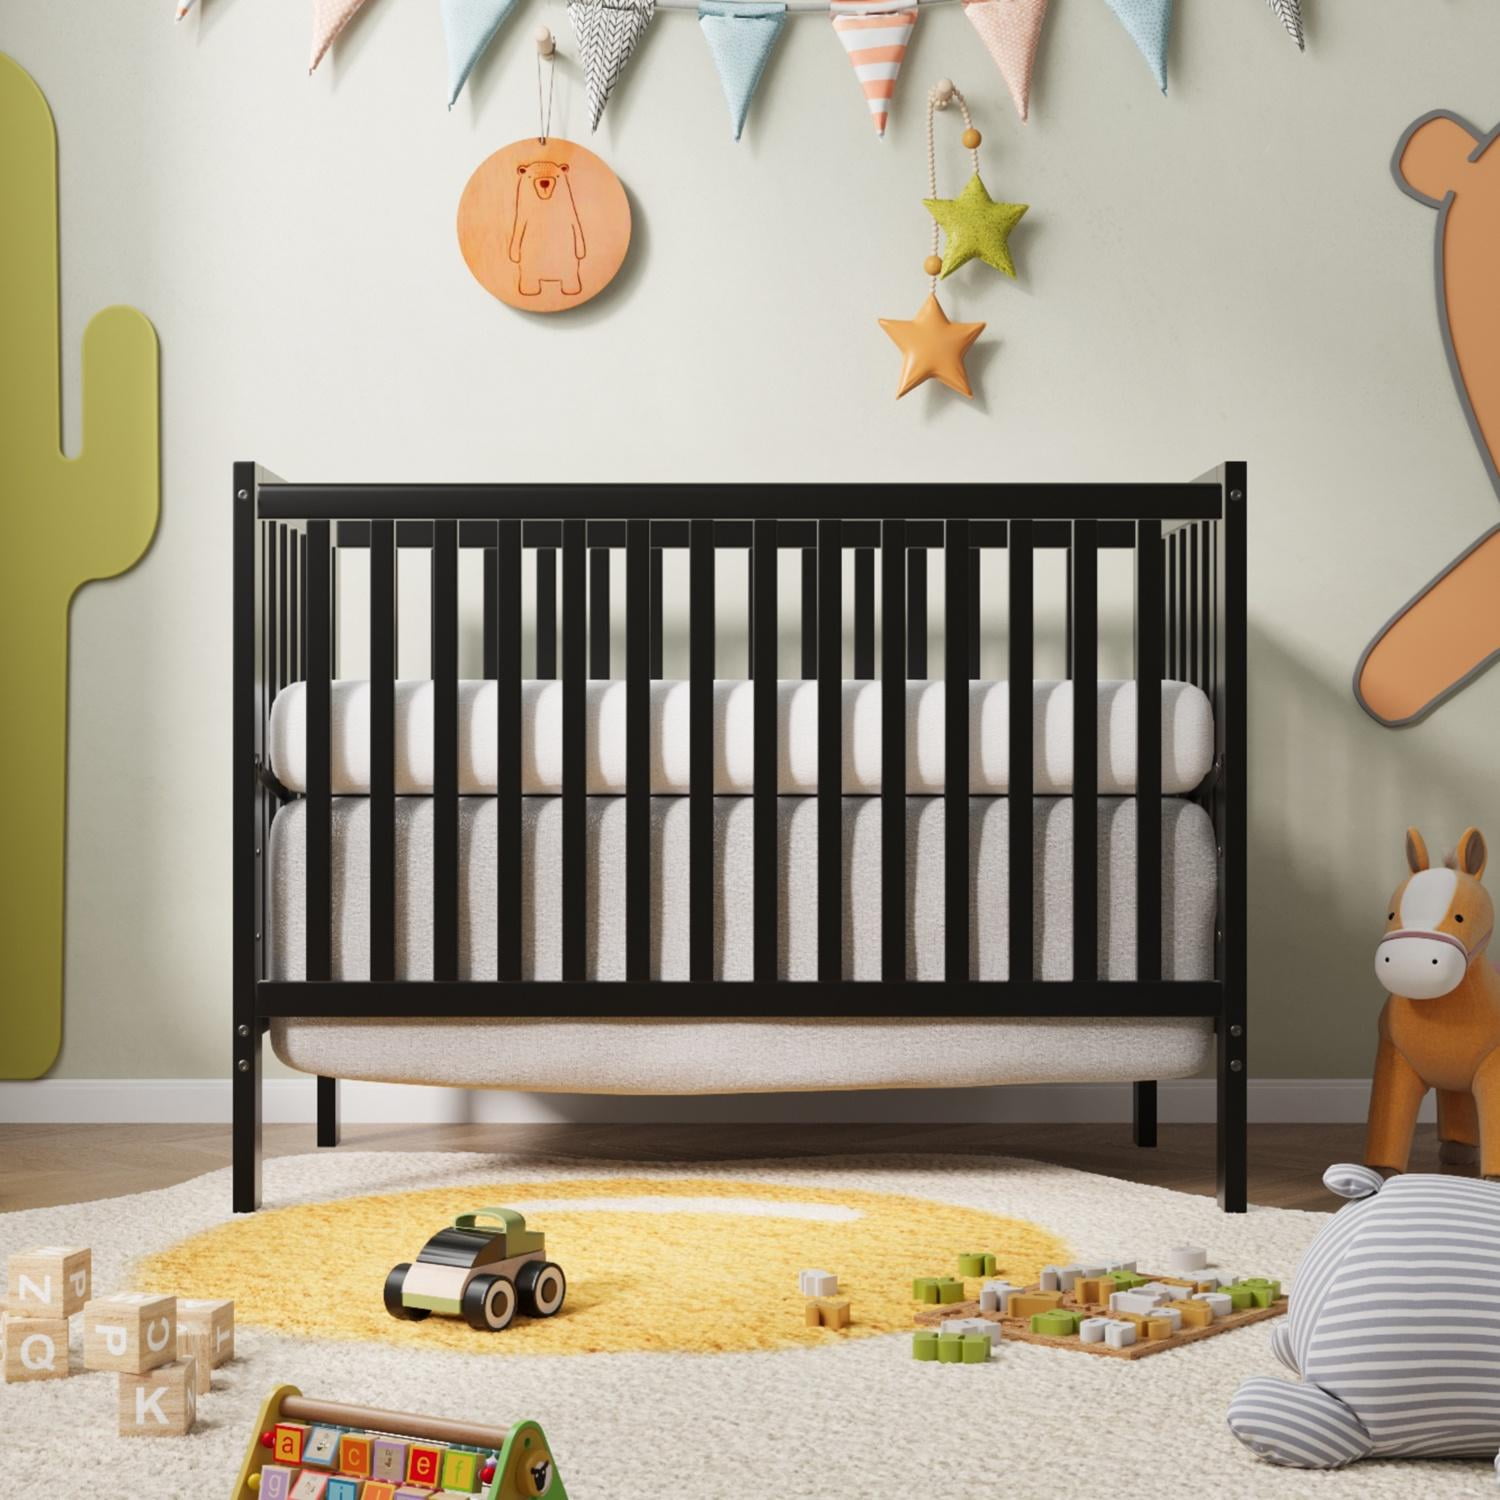 HSUNNS 5-in-1 Convertible Crib, Baby Crib with Slats, Certified Baby Safe Crib, Converts from Baby Crib to Toddler Bed, Easy Assembly, 3 Adjustable Heights, Black - image 1 of 8